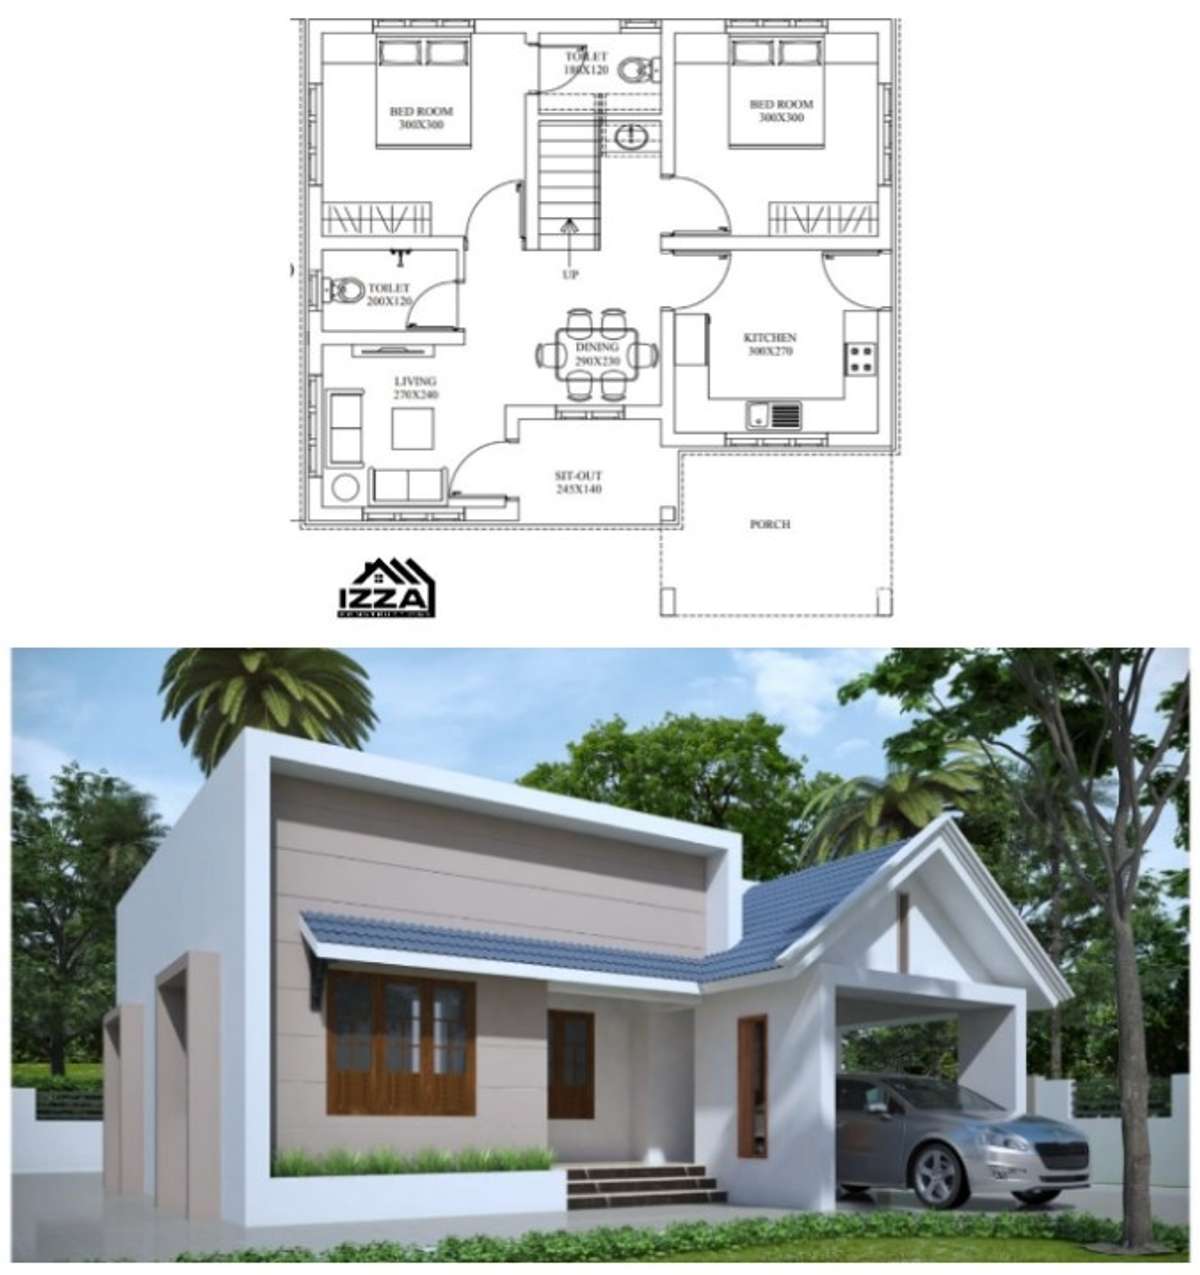 # on going project# Izza constructions alappuzha. 9072866600#